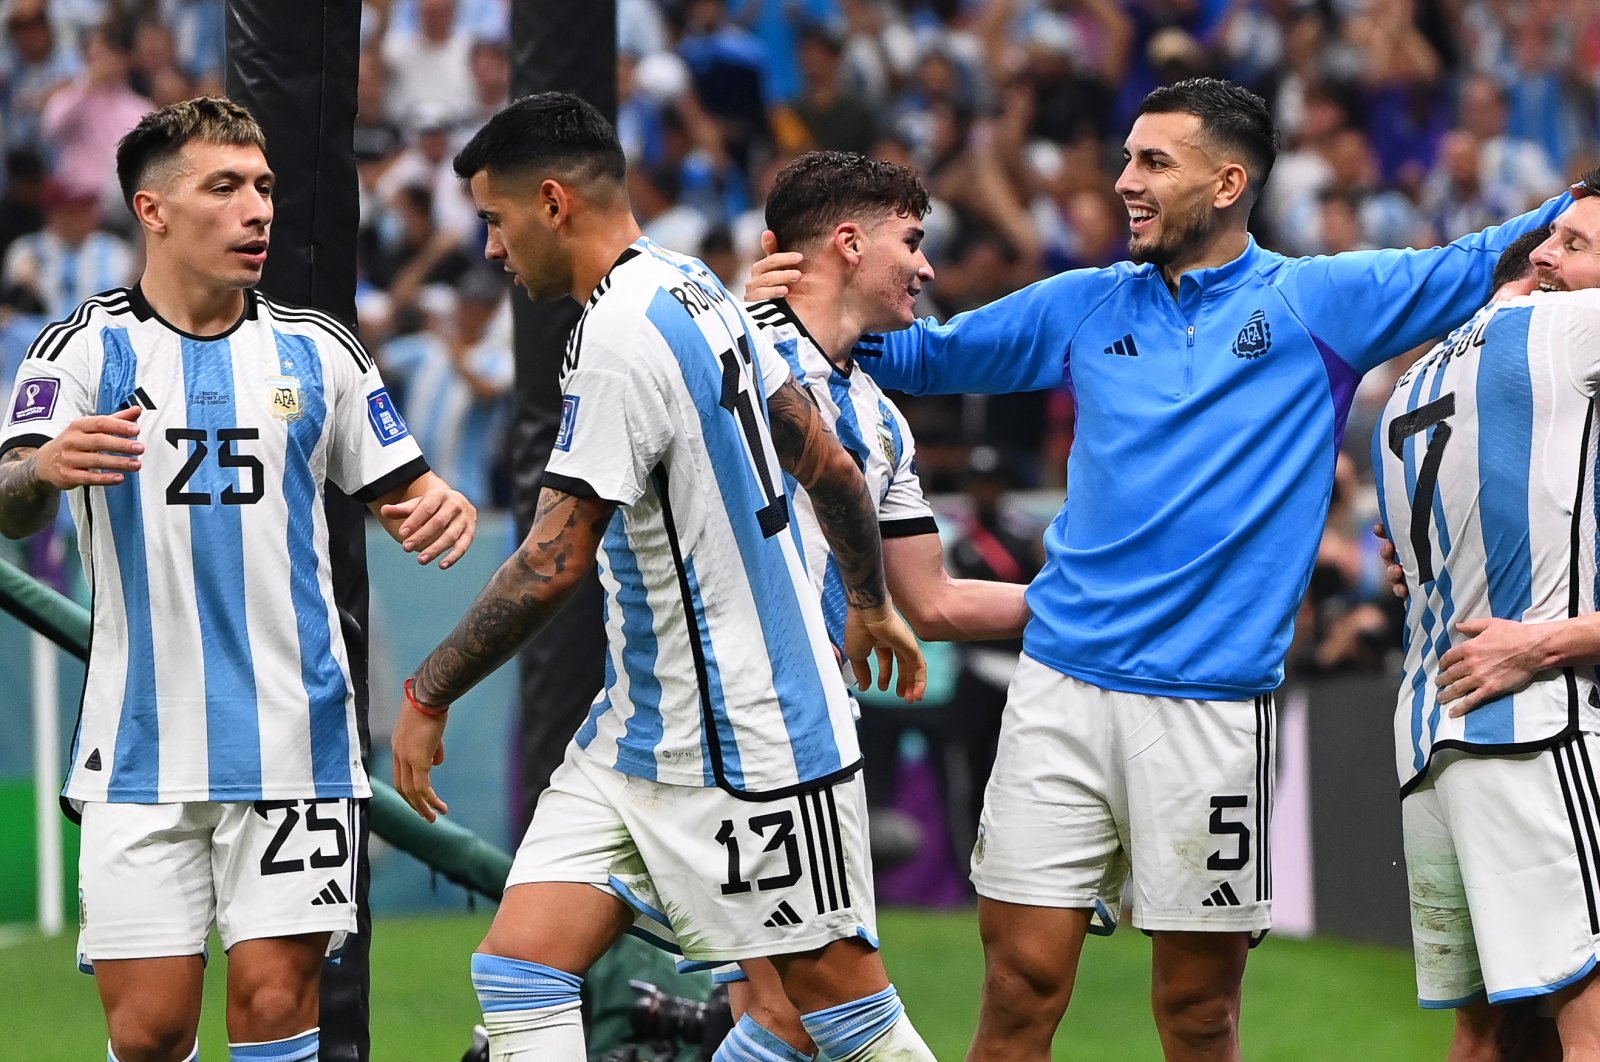 Julian Alvarez (3-L) of Argentina celebrates with teammates after scoring the 3-0 lead during the FIFA World Cup 2022 semifinal between Argentina and Croatia at Lusail Stadium in Lusail, Qatar, Dec. 13, 2022.  (EPA Photo)